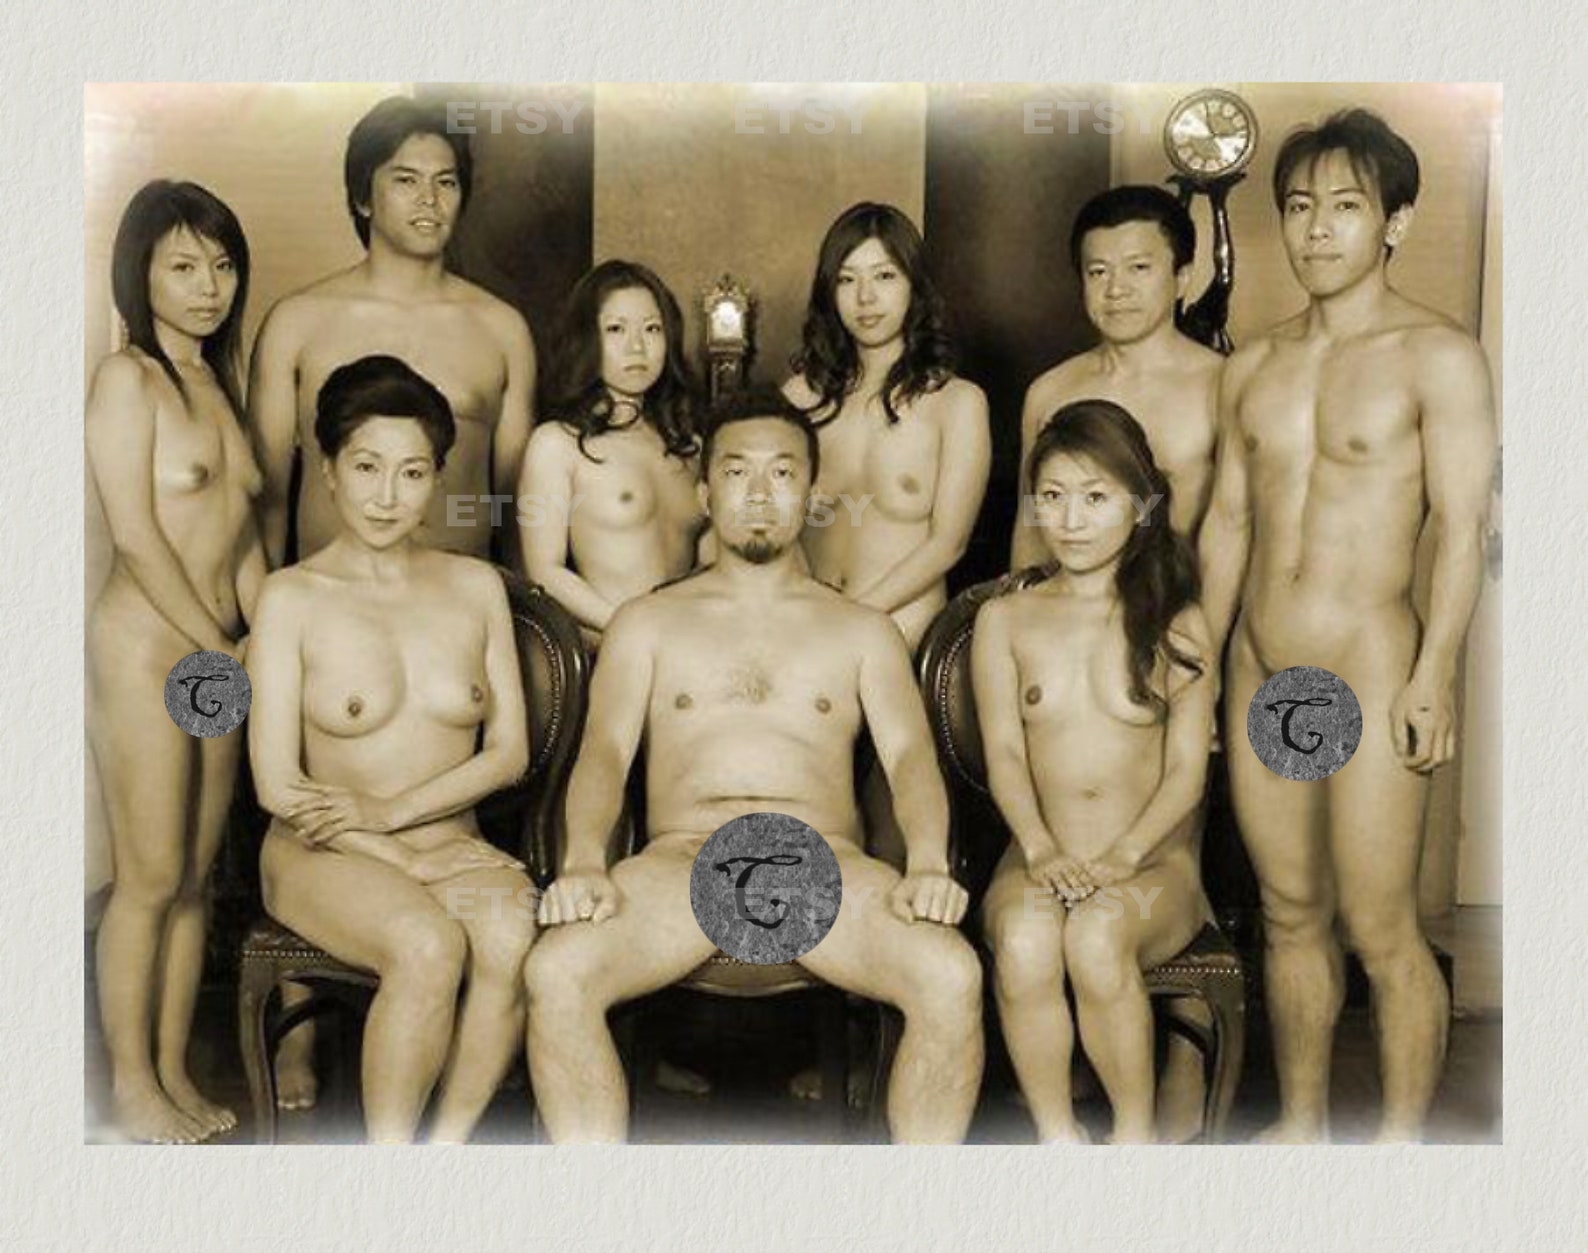 Antique Japanese family nude Vintage Photo erotic 1900s Male image 1.